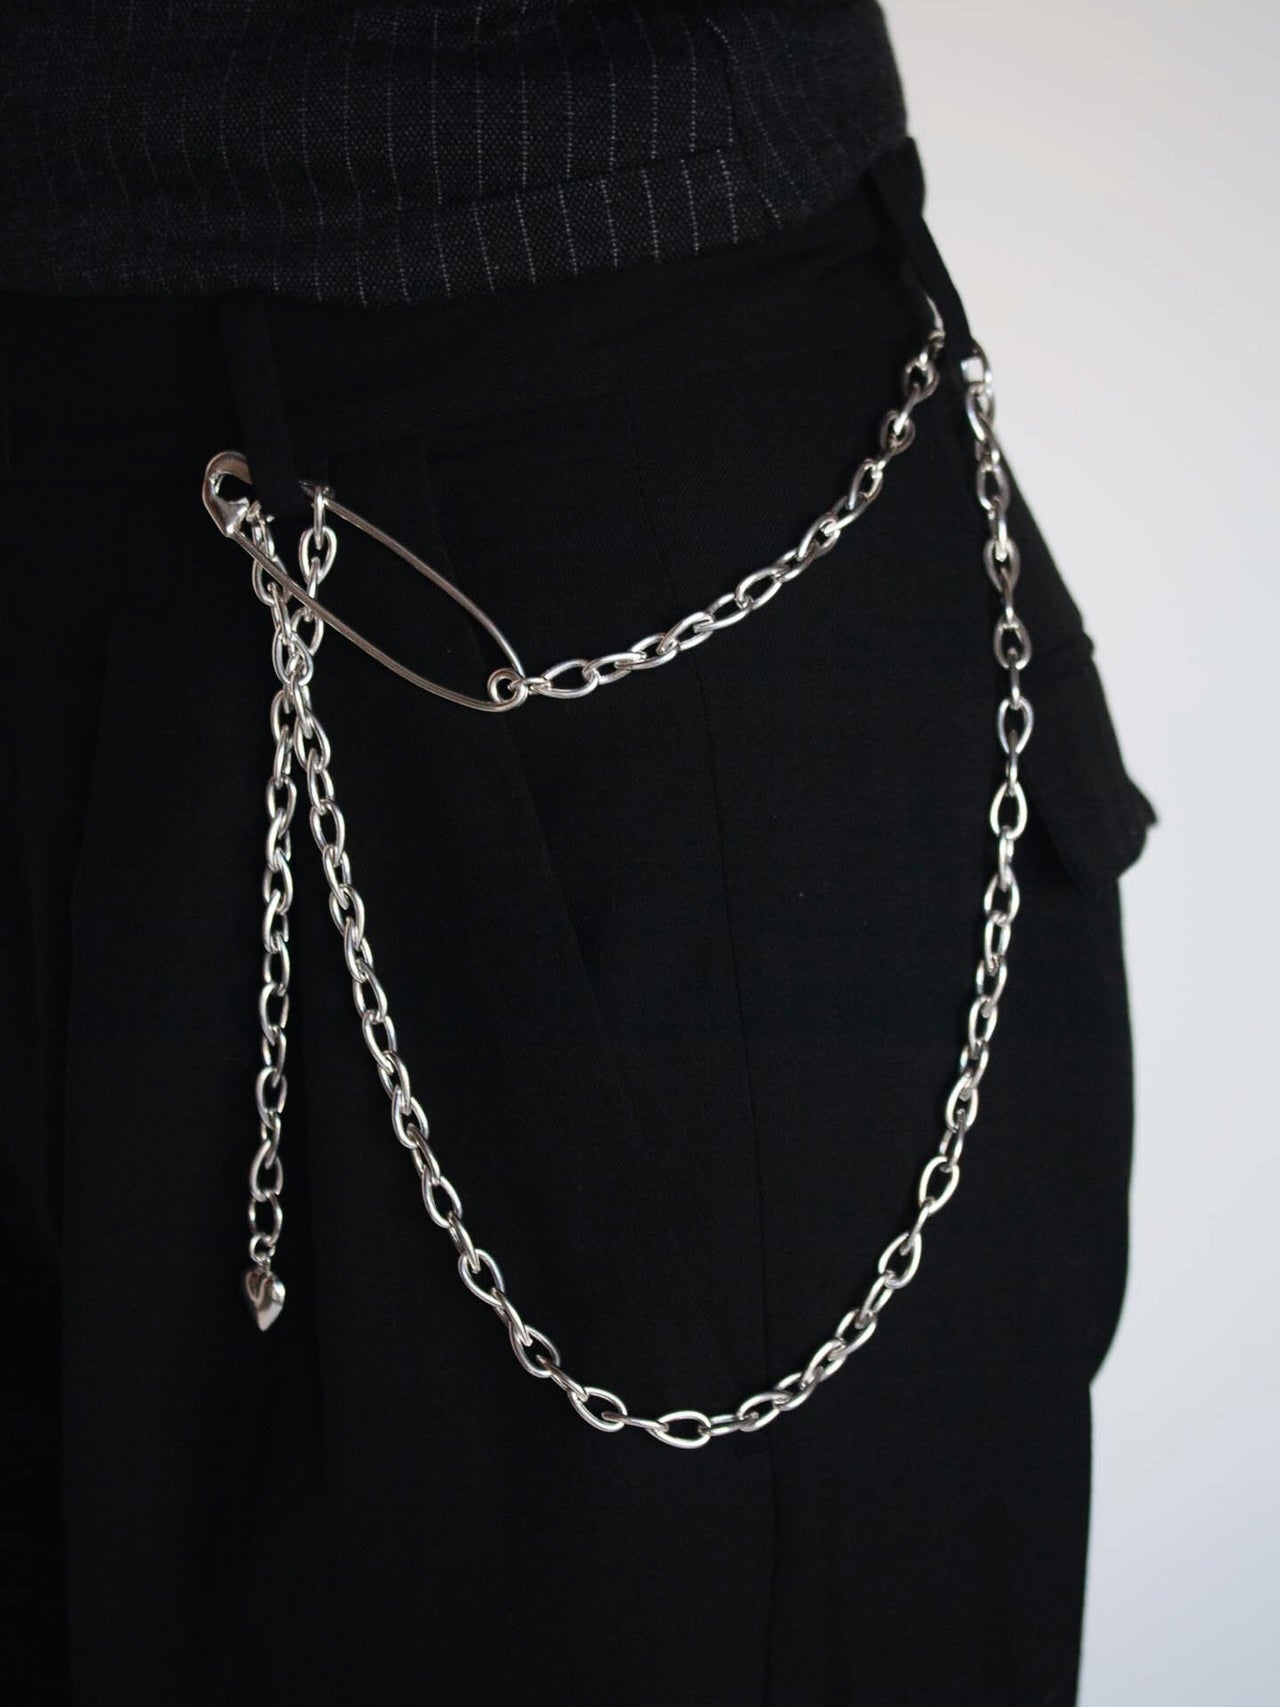 Sterling Silver Safety Pin Body Chain pictured on model as belt chain.